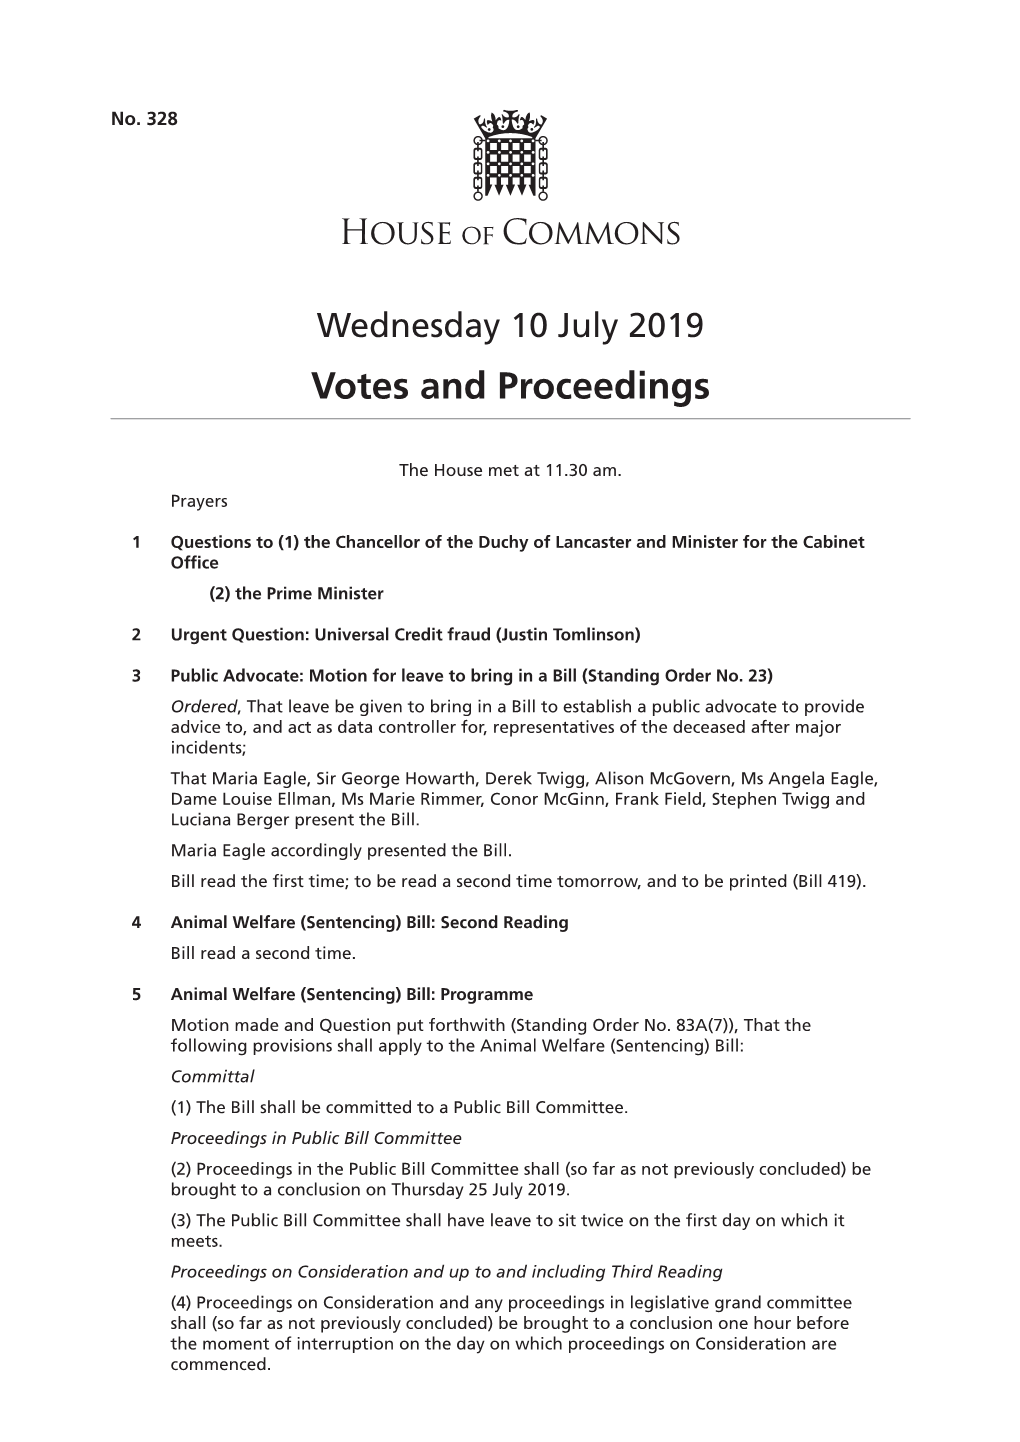 Votes and Proceedings for 10 Jul 2019